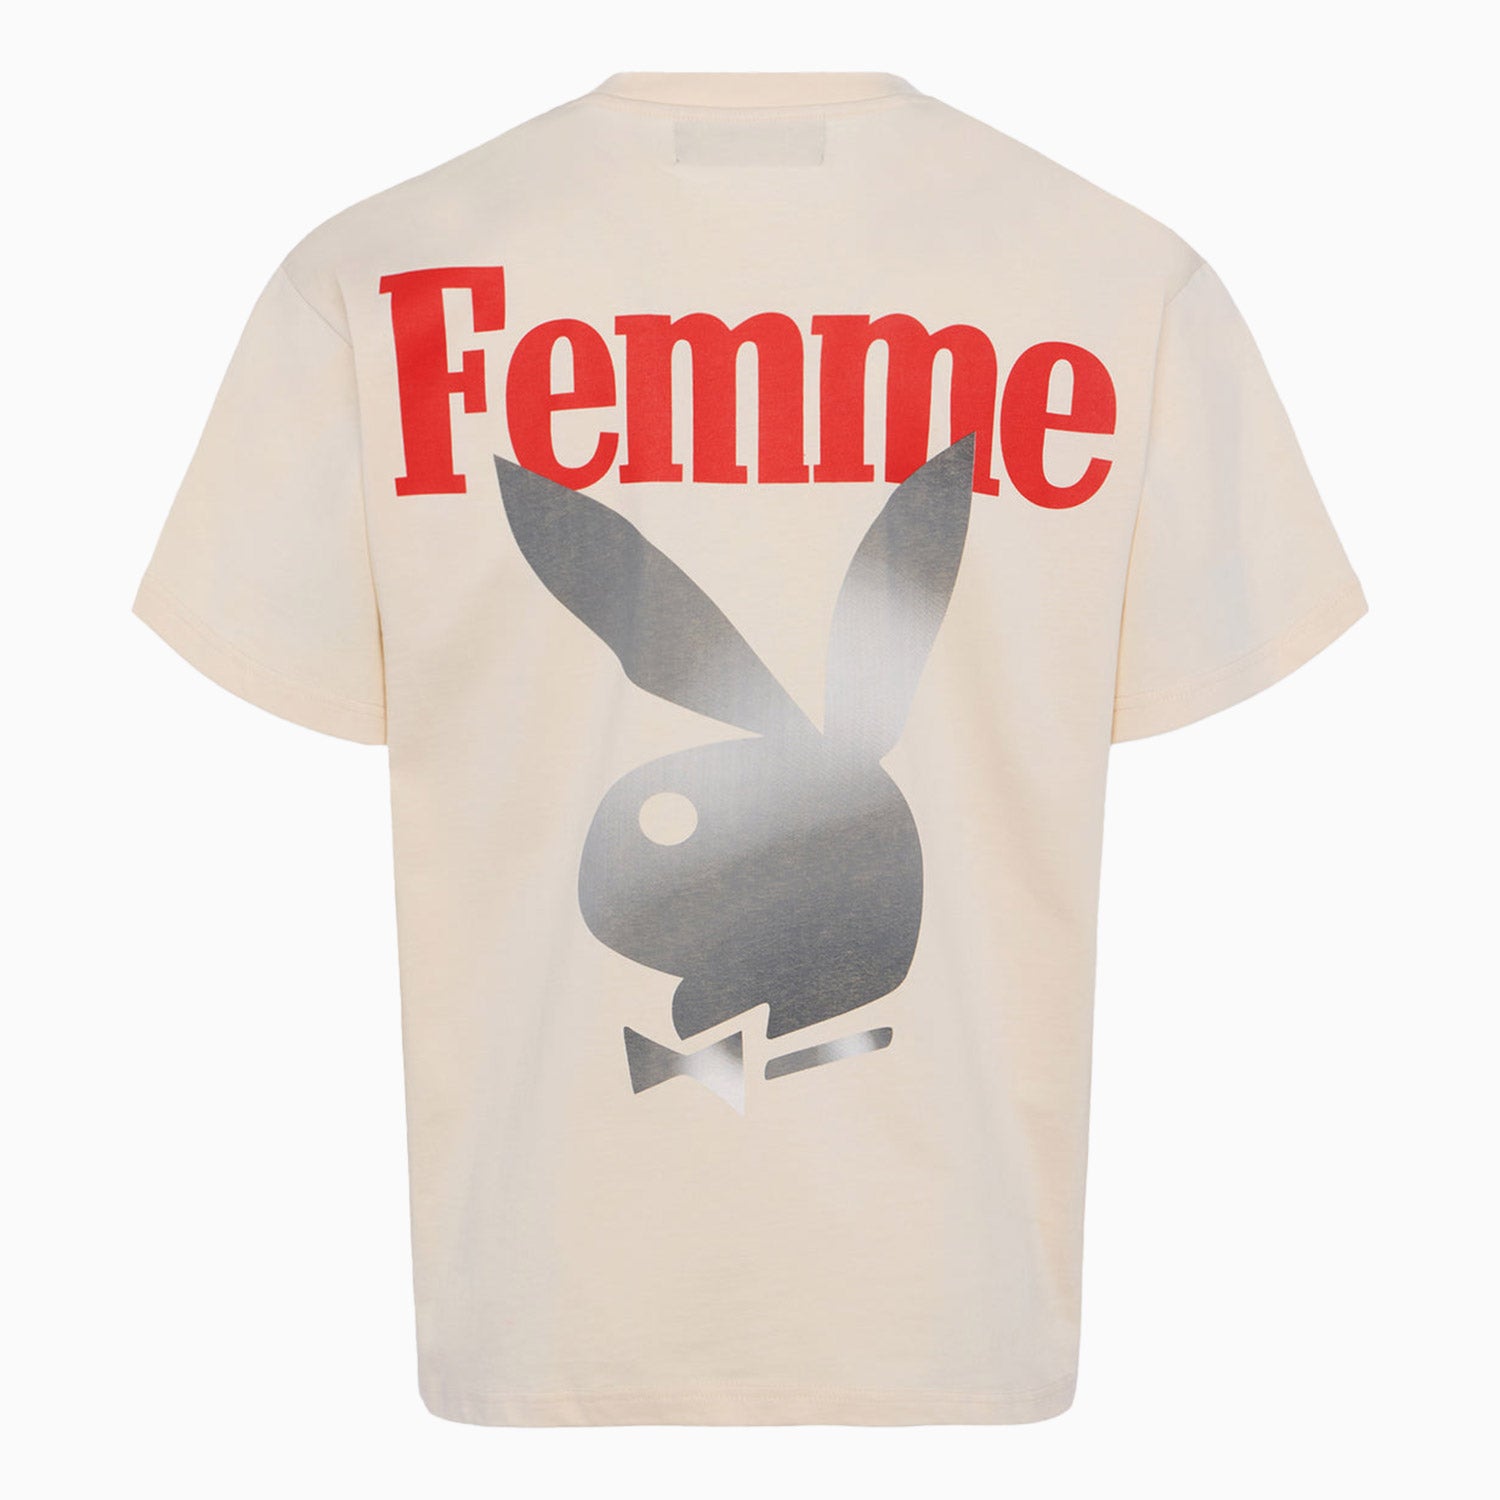 homme-femme-mens-twisted-bunny-t-shirt-hfpb202420-1-crm